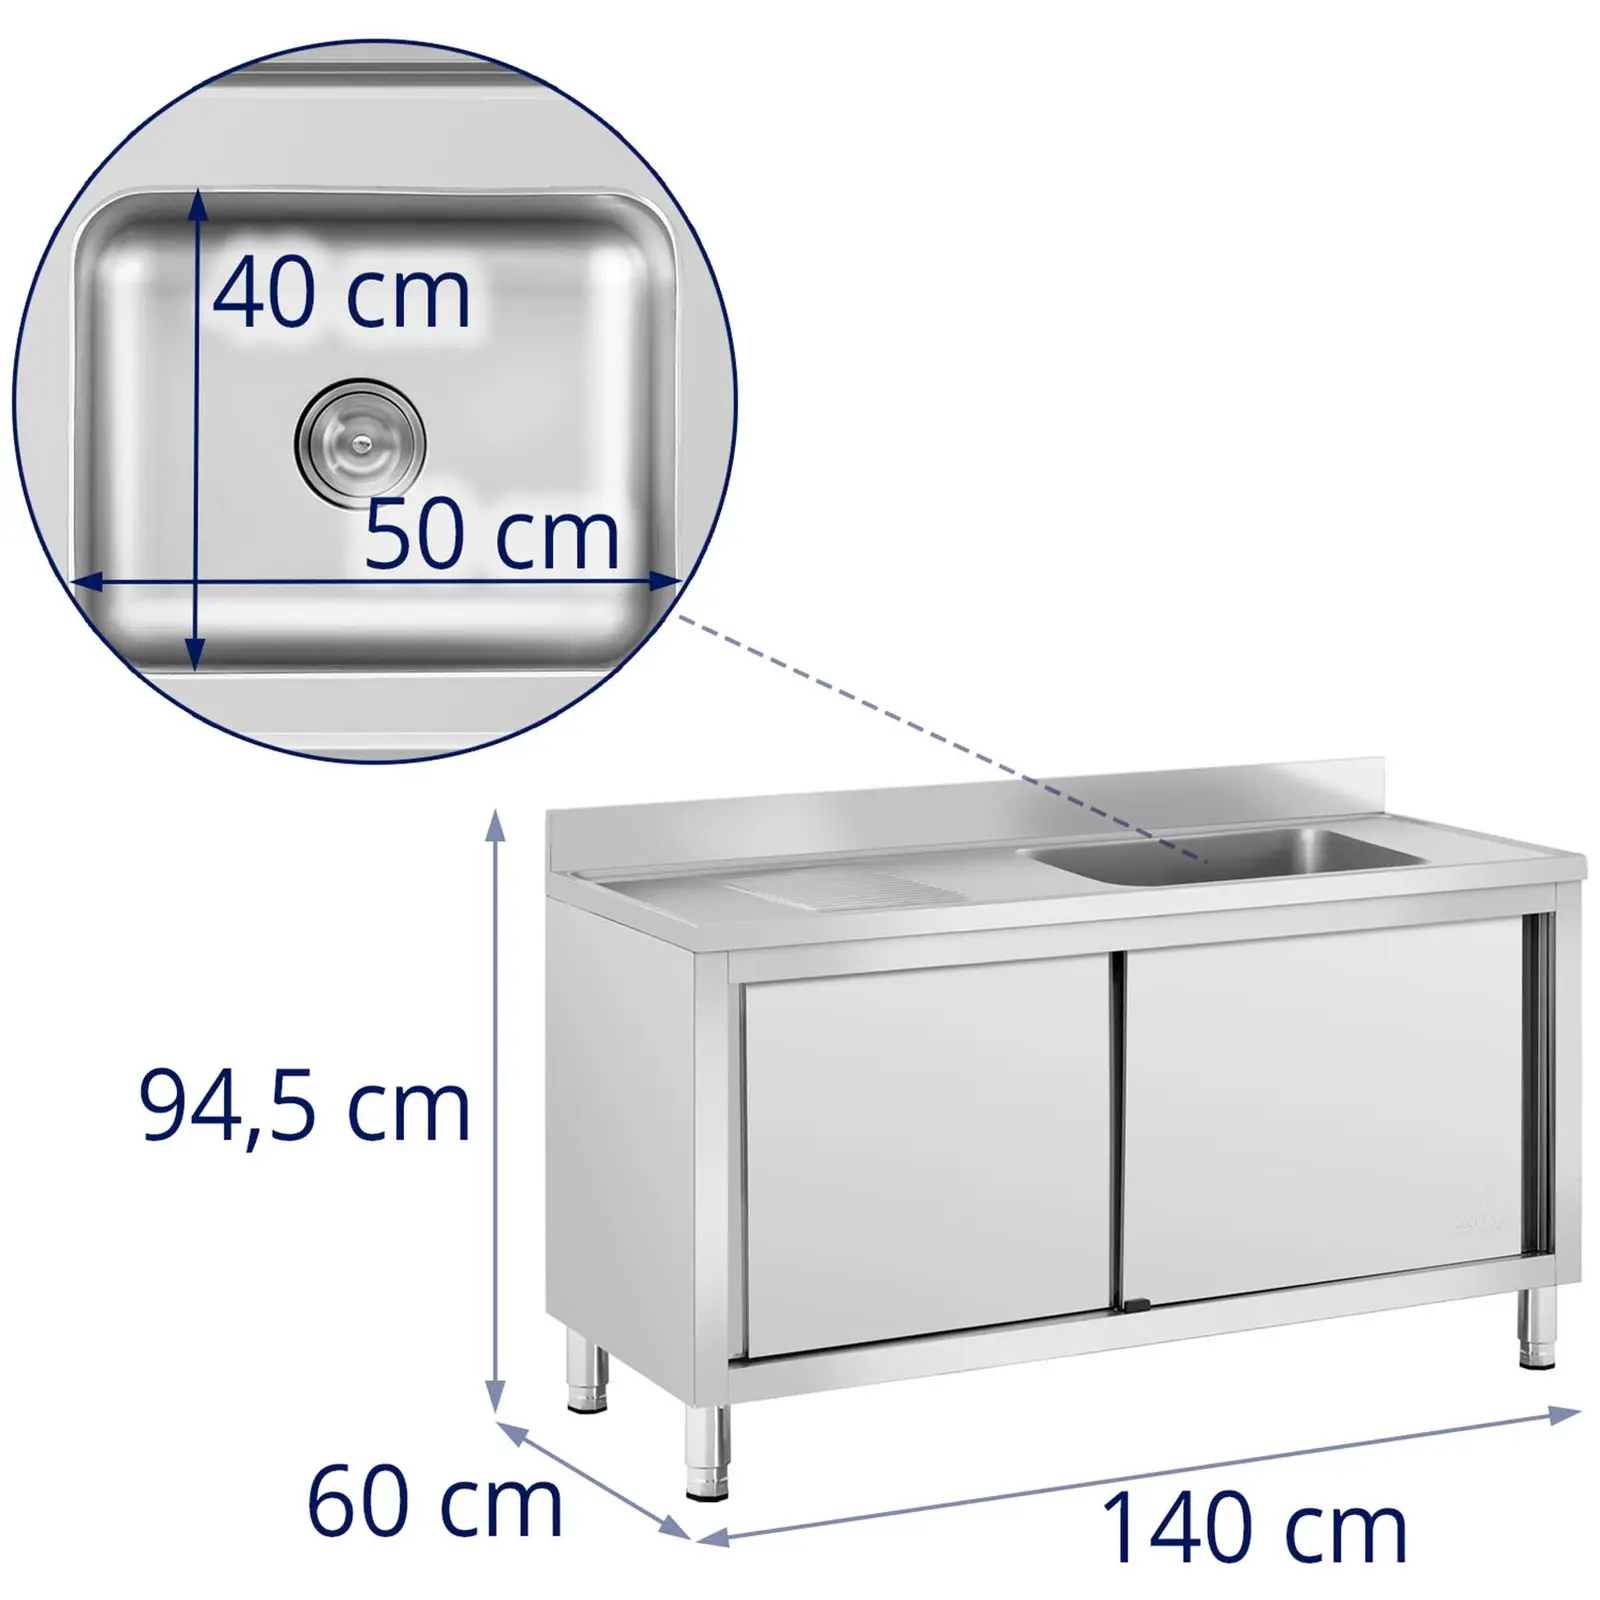 Commercial Kitchen Sink with Cabinet - 1 basin - Royal Catering - Stainless steel - 500 x 400 x 240 mm